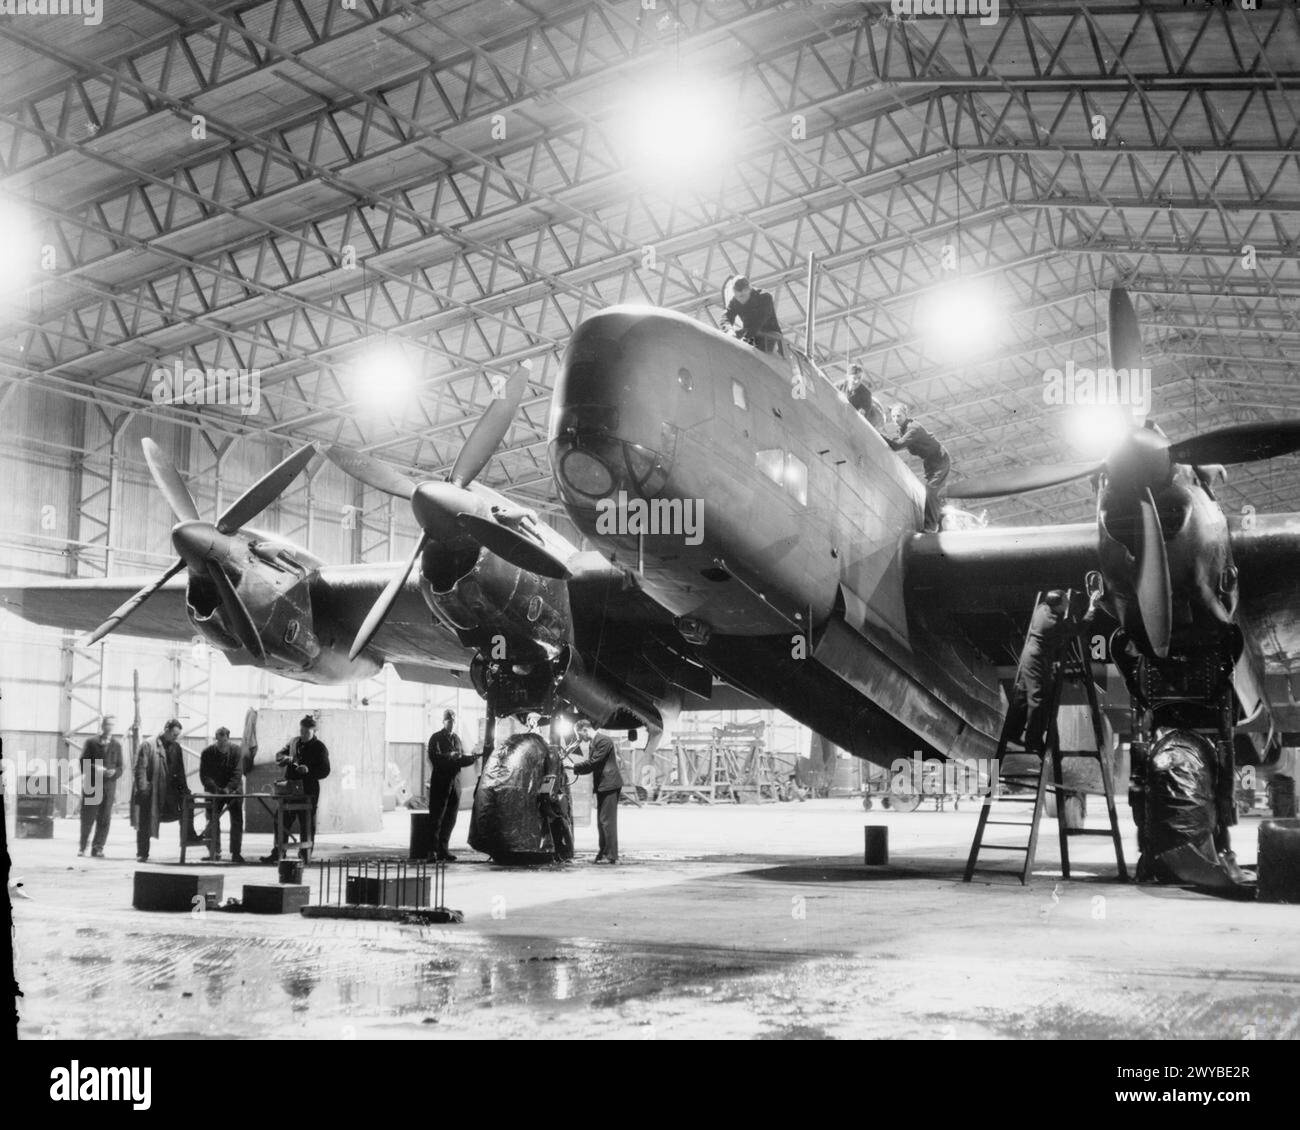 ROYAL AIR FORCE BOMBER COMMAND, 1942-1945. - A Handley Page Halifax B Mark III Series 1A of No. 1663 Heavy Conversion Unit undergoes maintenance at night in a T2 Type hangar at Rufforth, Yorkshire. , Stock Photo